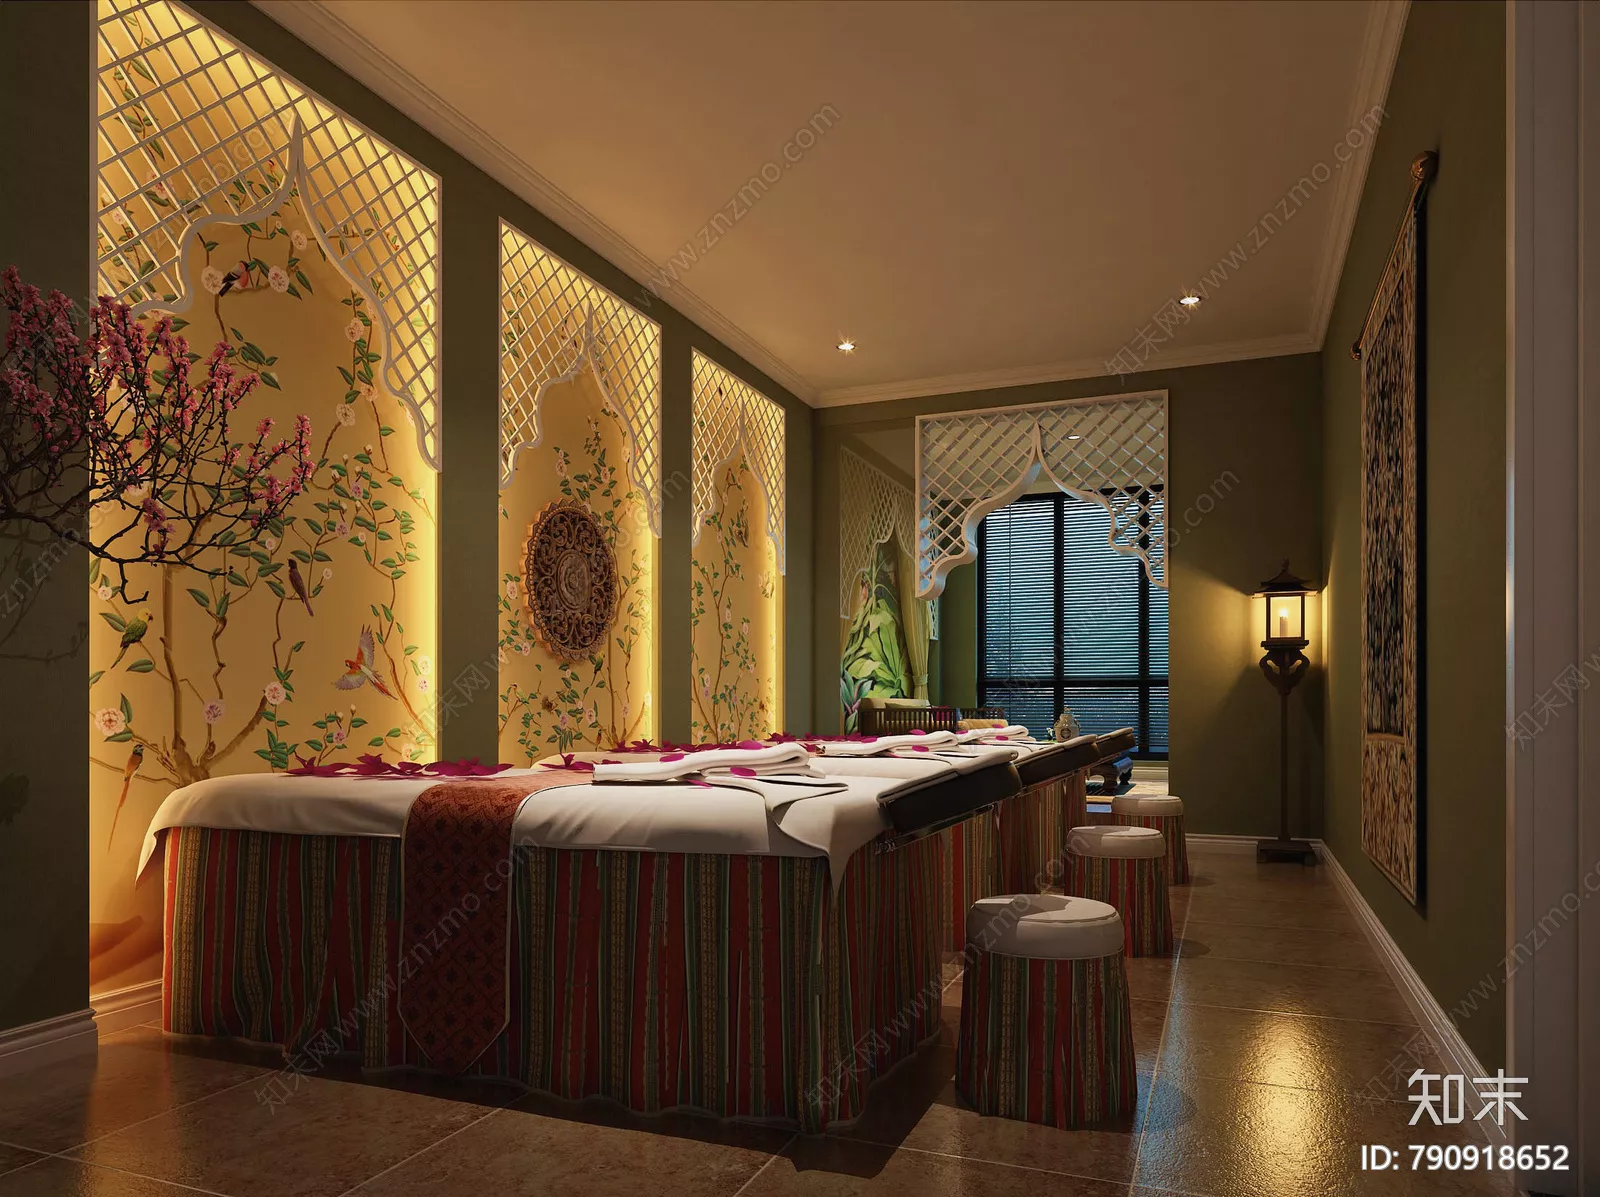 MODERN SPA AND BEAUTY - SKETCHUP 3D SCENE - VRAY OR ENSCAPE - ID14038